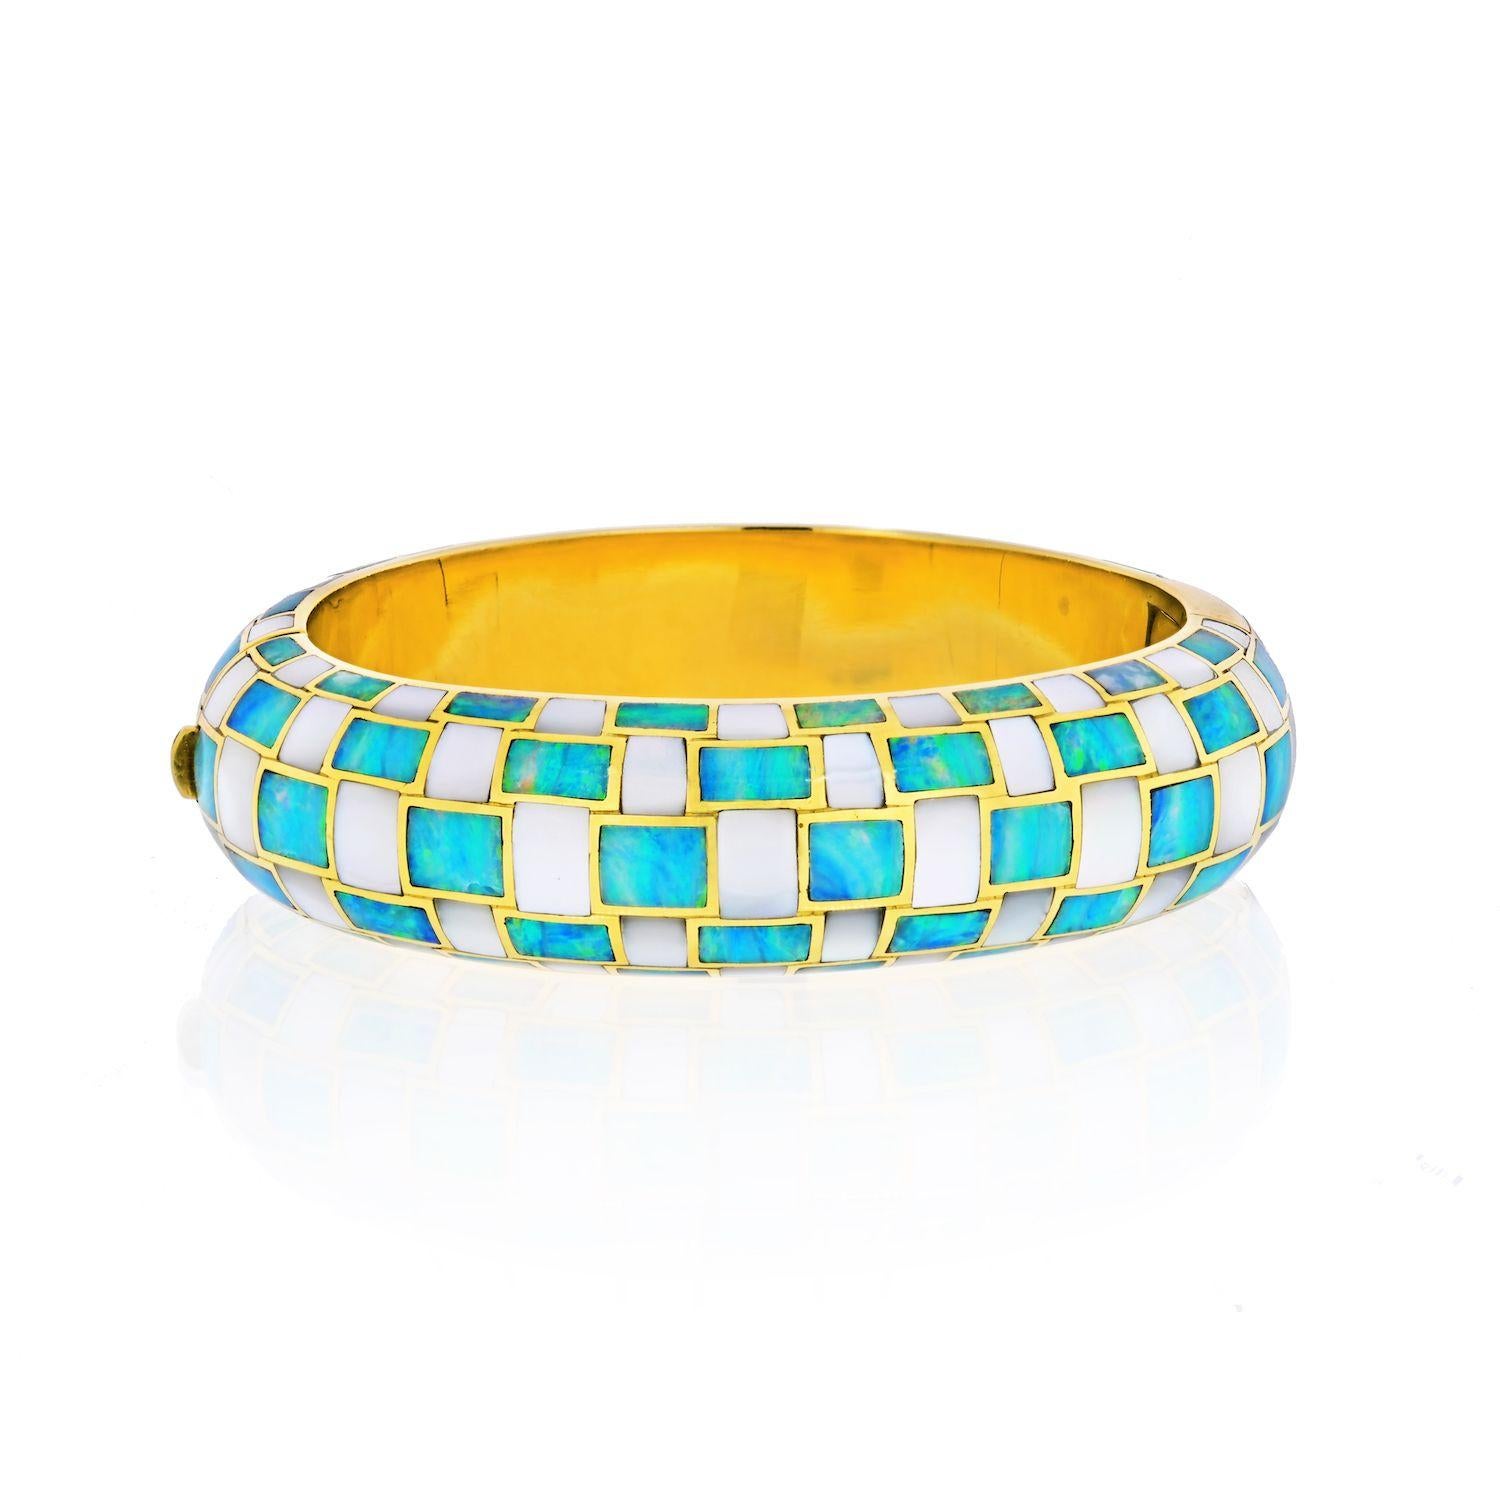 A truly eye-catching bracelet. Maker's mark for Angela Cummings.
The 18k gold hinged bangle features inlaid mother-of-pearl and opal, marked for Angela Cummings and Tiffany & Co. Gross weight 55.50 grams.
Dimensions: 6-1/2 inches x 11/16 inch.
From